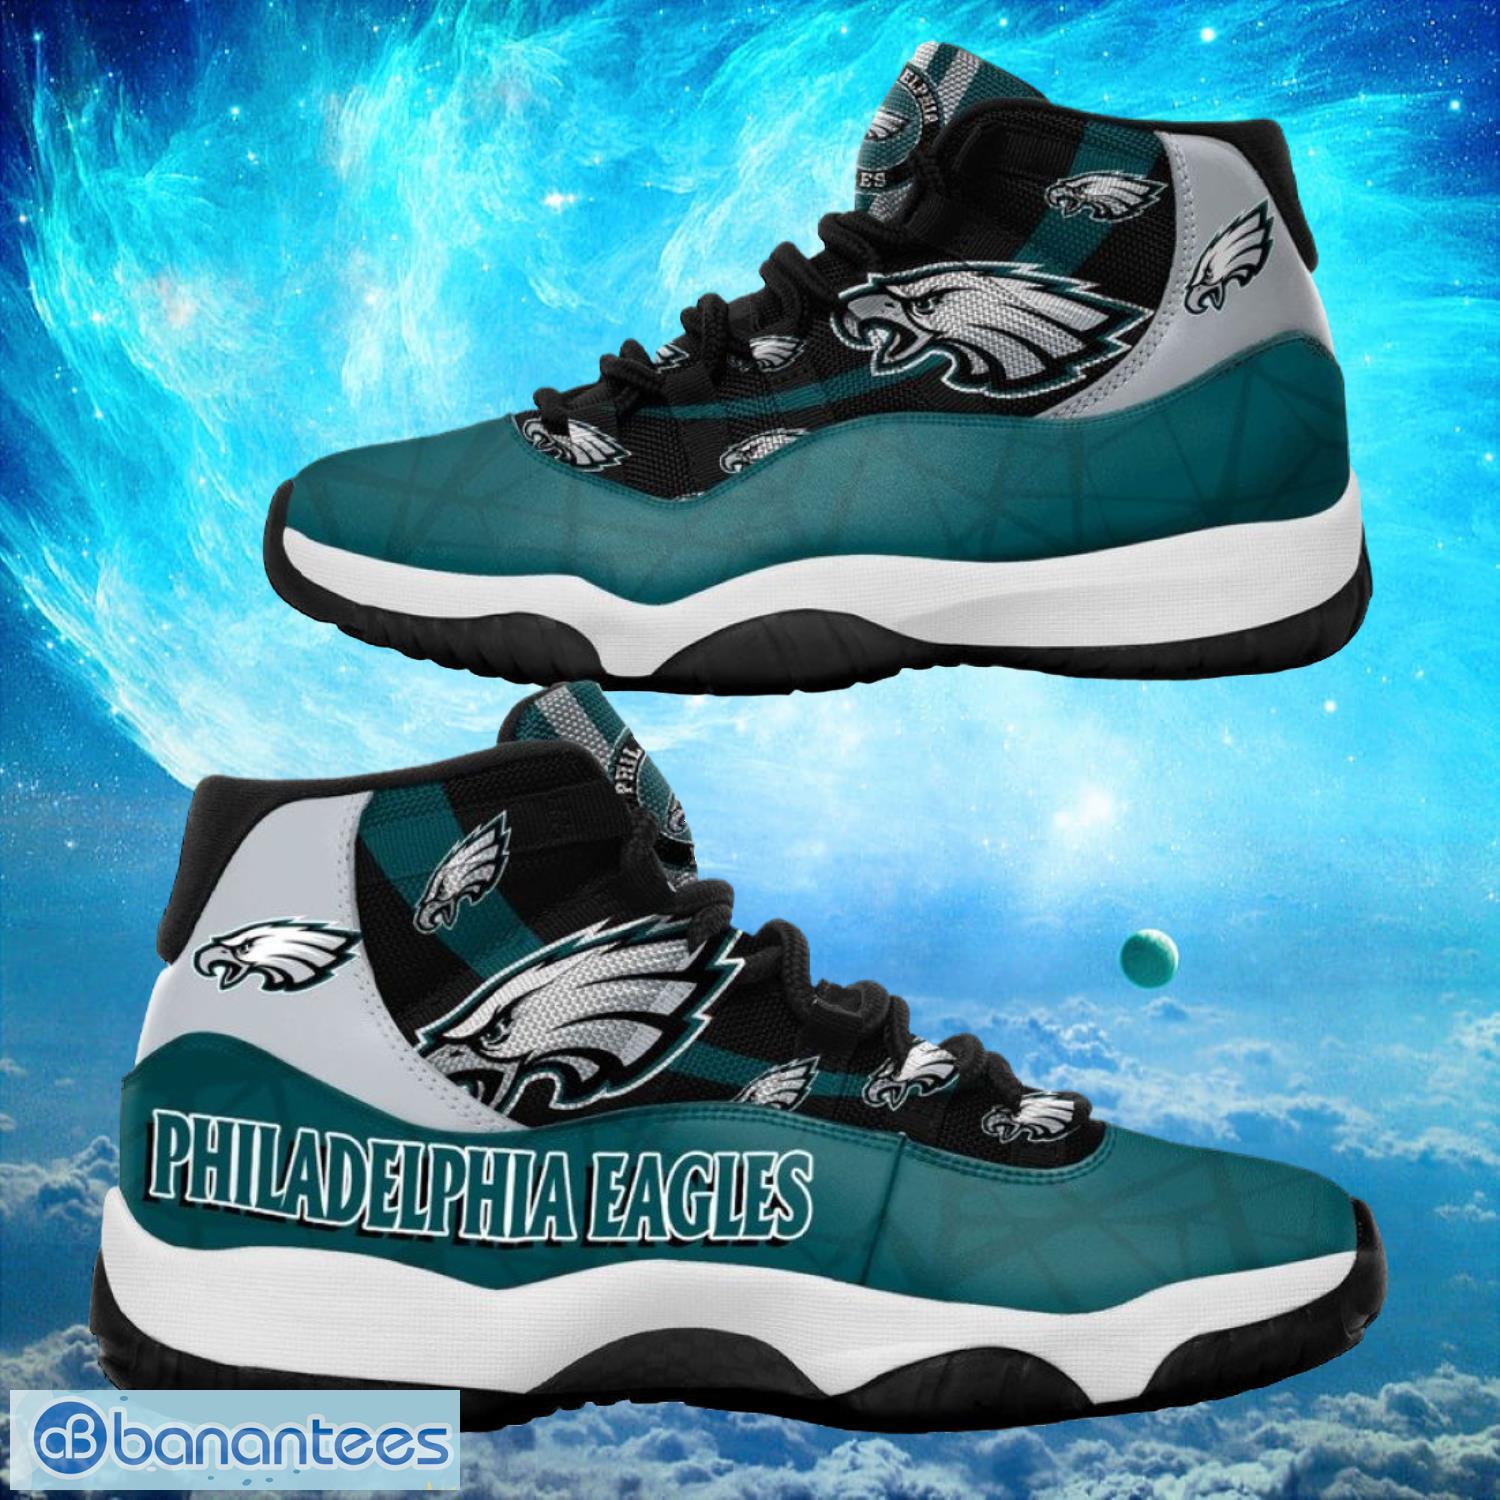 Philadelphia Eagles NFL Air Jordan 11 Sneakers Shoes Gift For Fans Product Photo 1